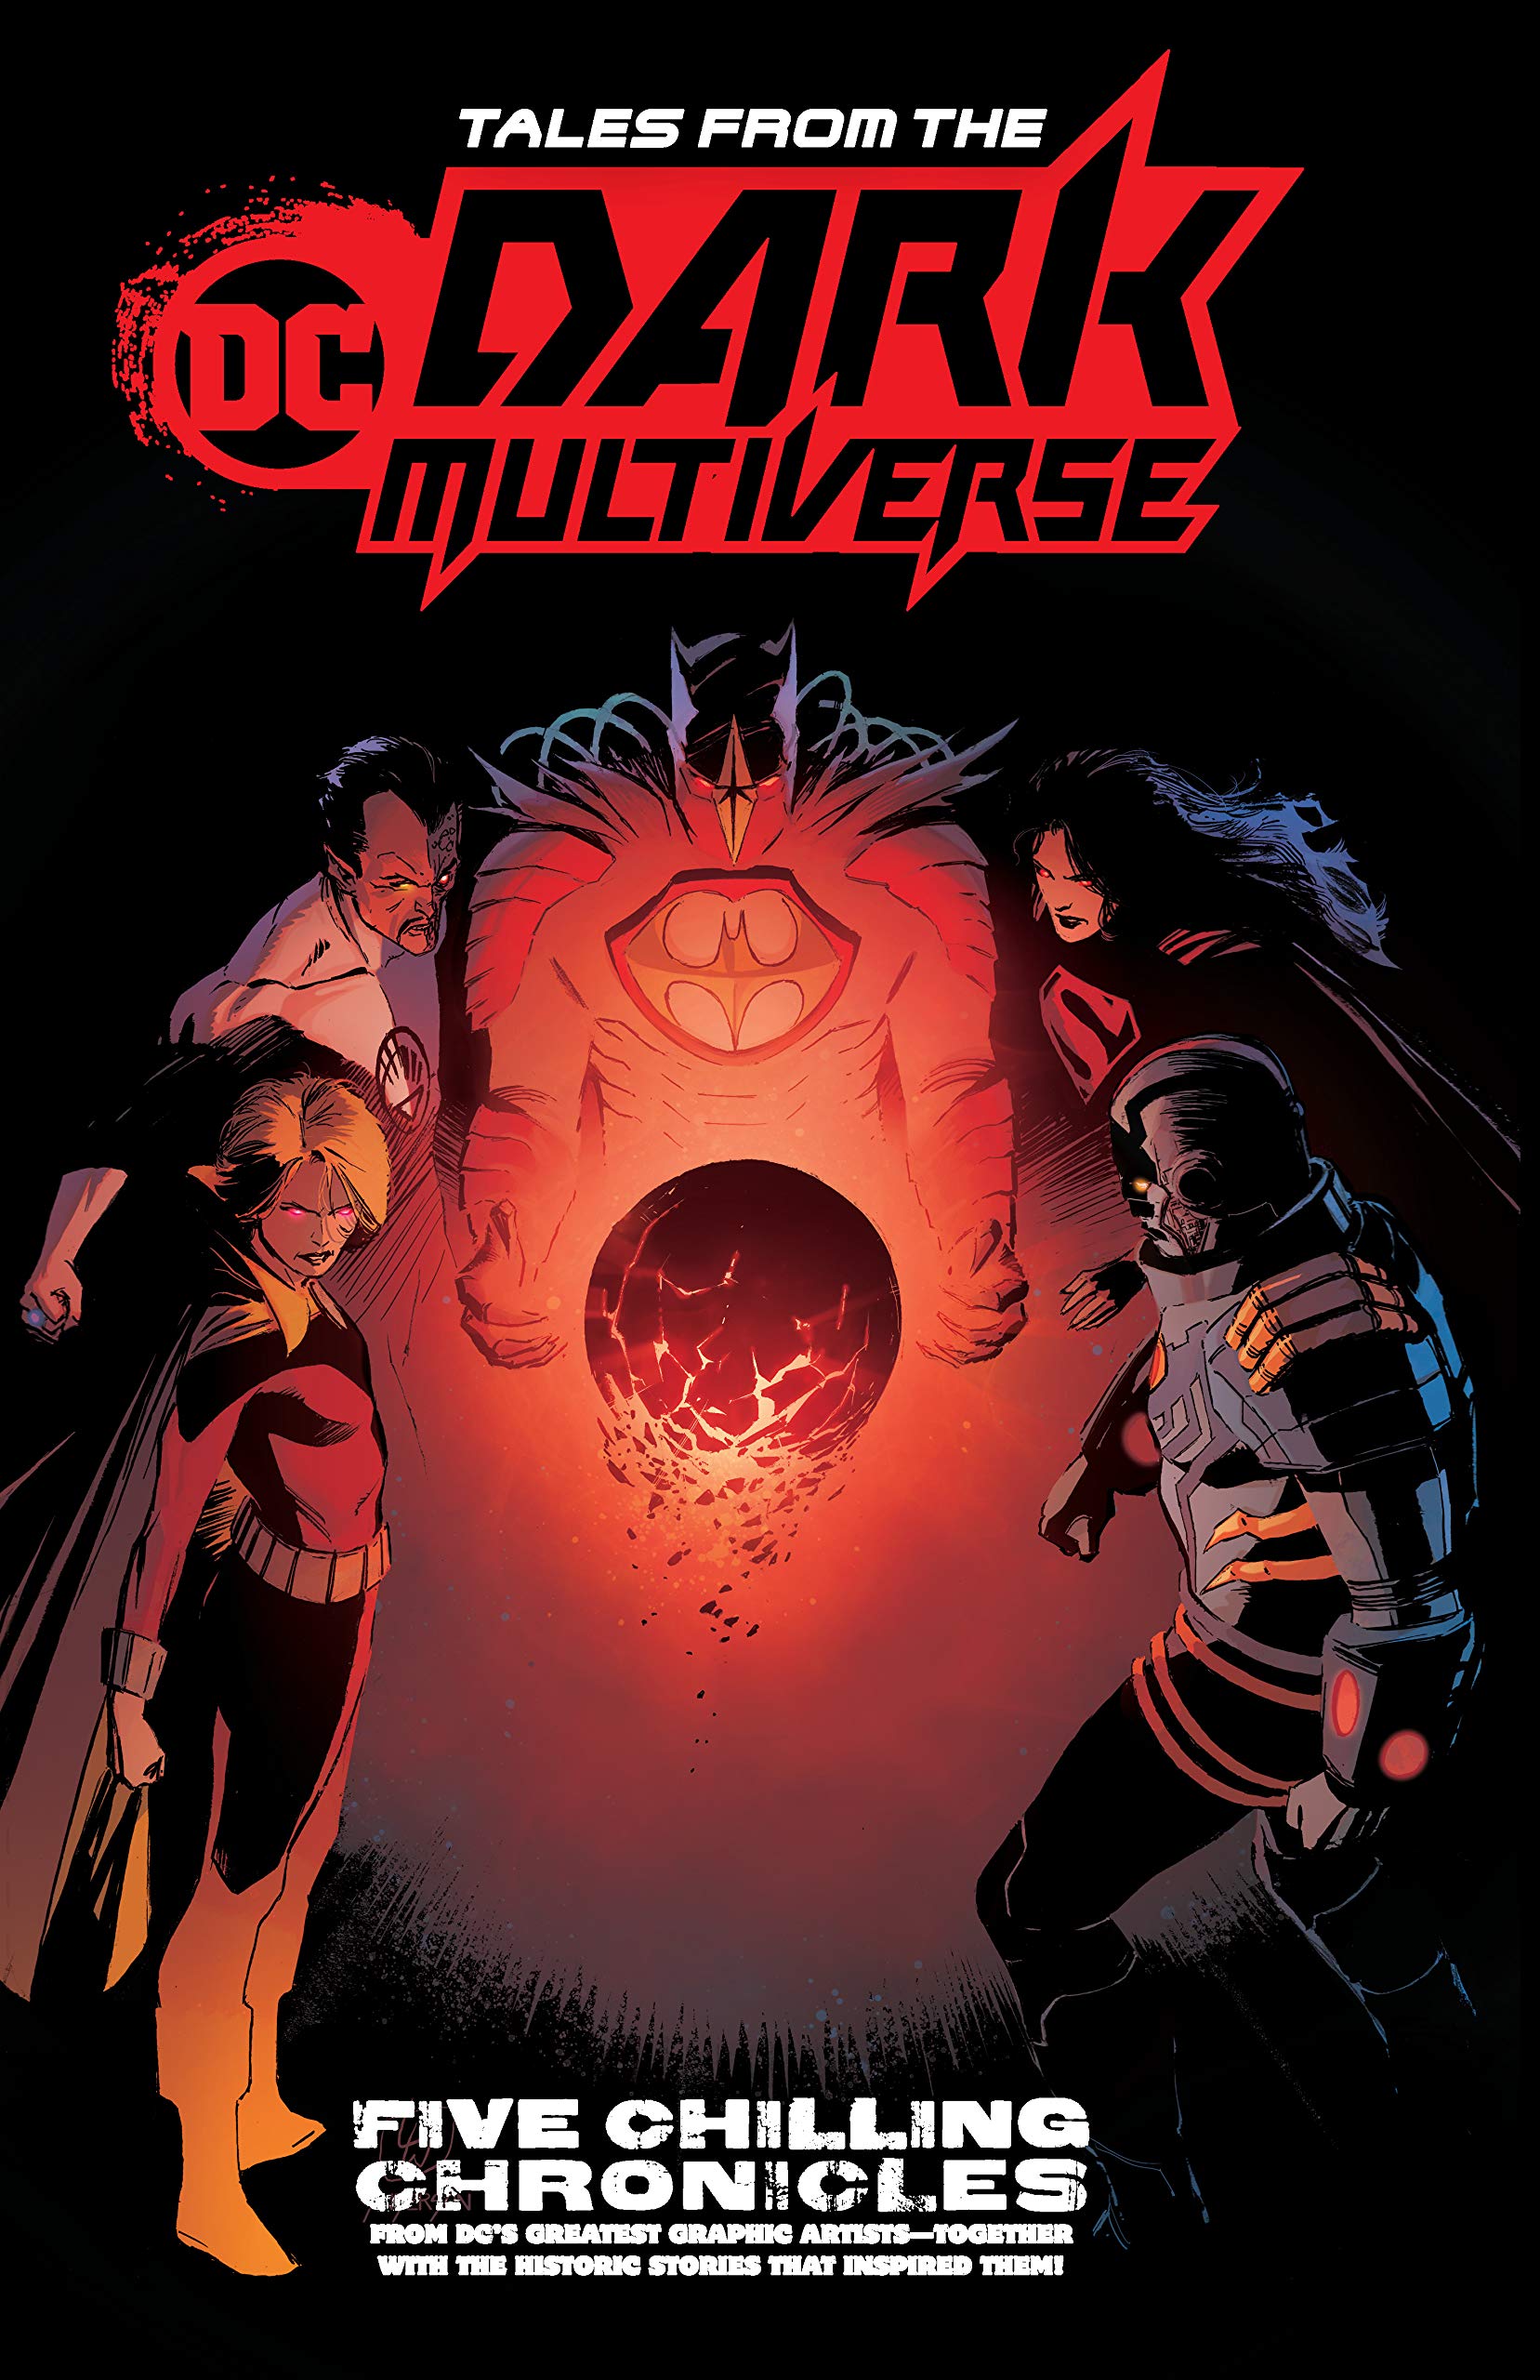 Tales from the DC Dark Multiverse |  image0